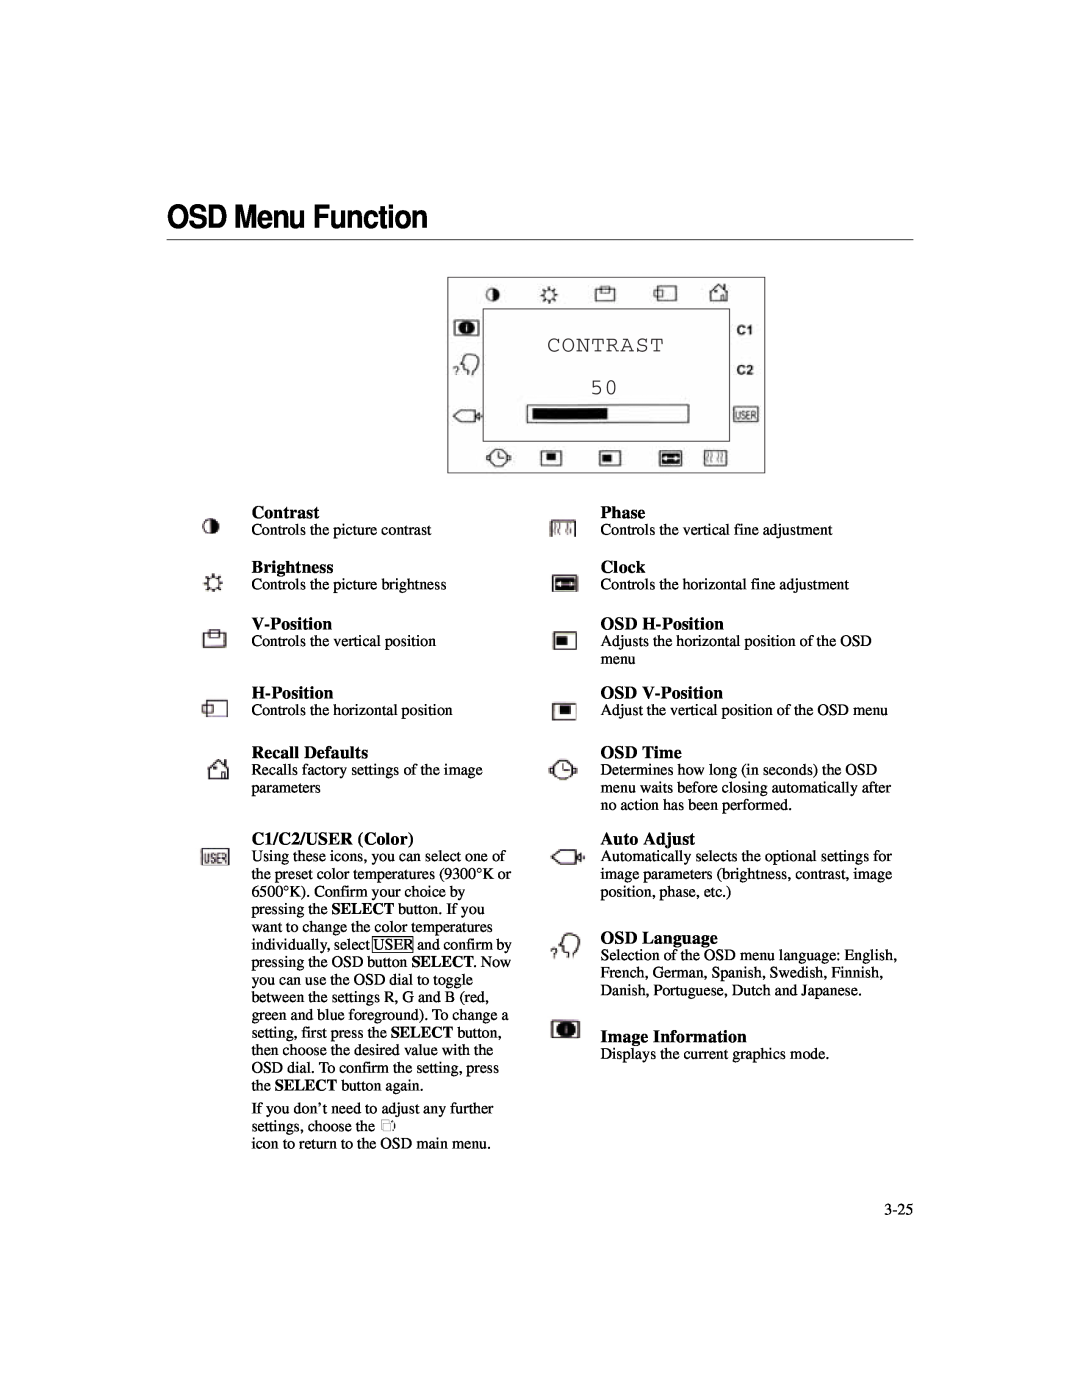 Elo TouchSystems 1925L OSD Menu Function, Contrast, Brightness, V-Position, H-Position, Recall Defaults, C1/C2/USER Color 